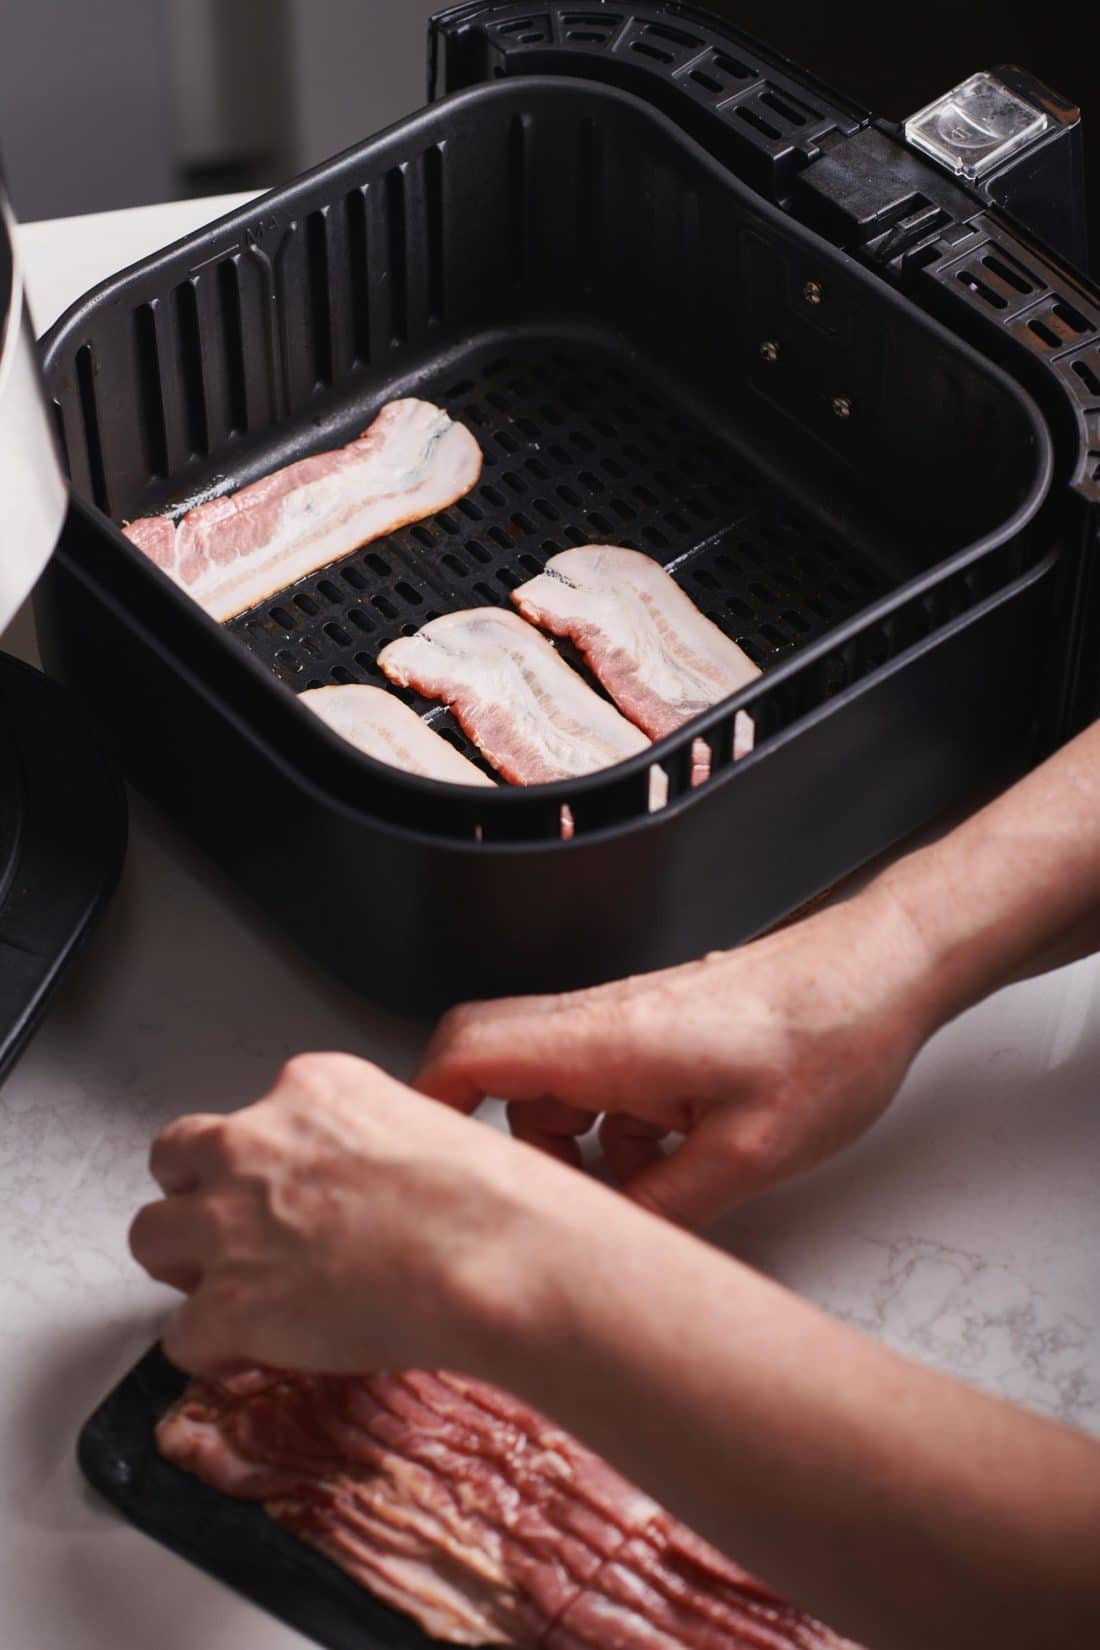 How to Make Bacon in the Air Fryer